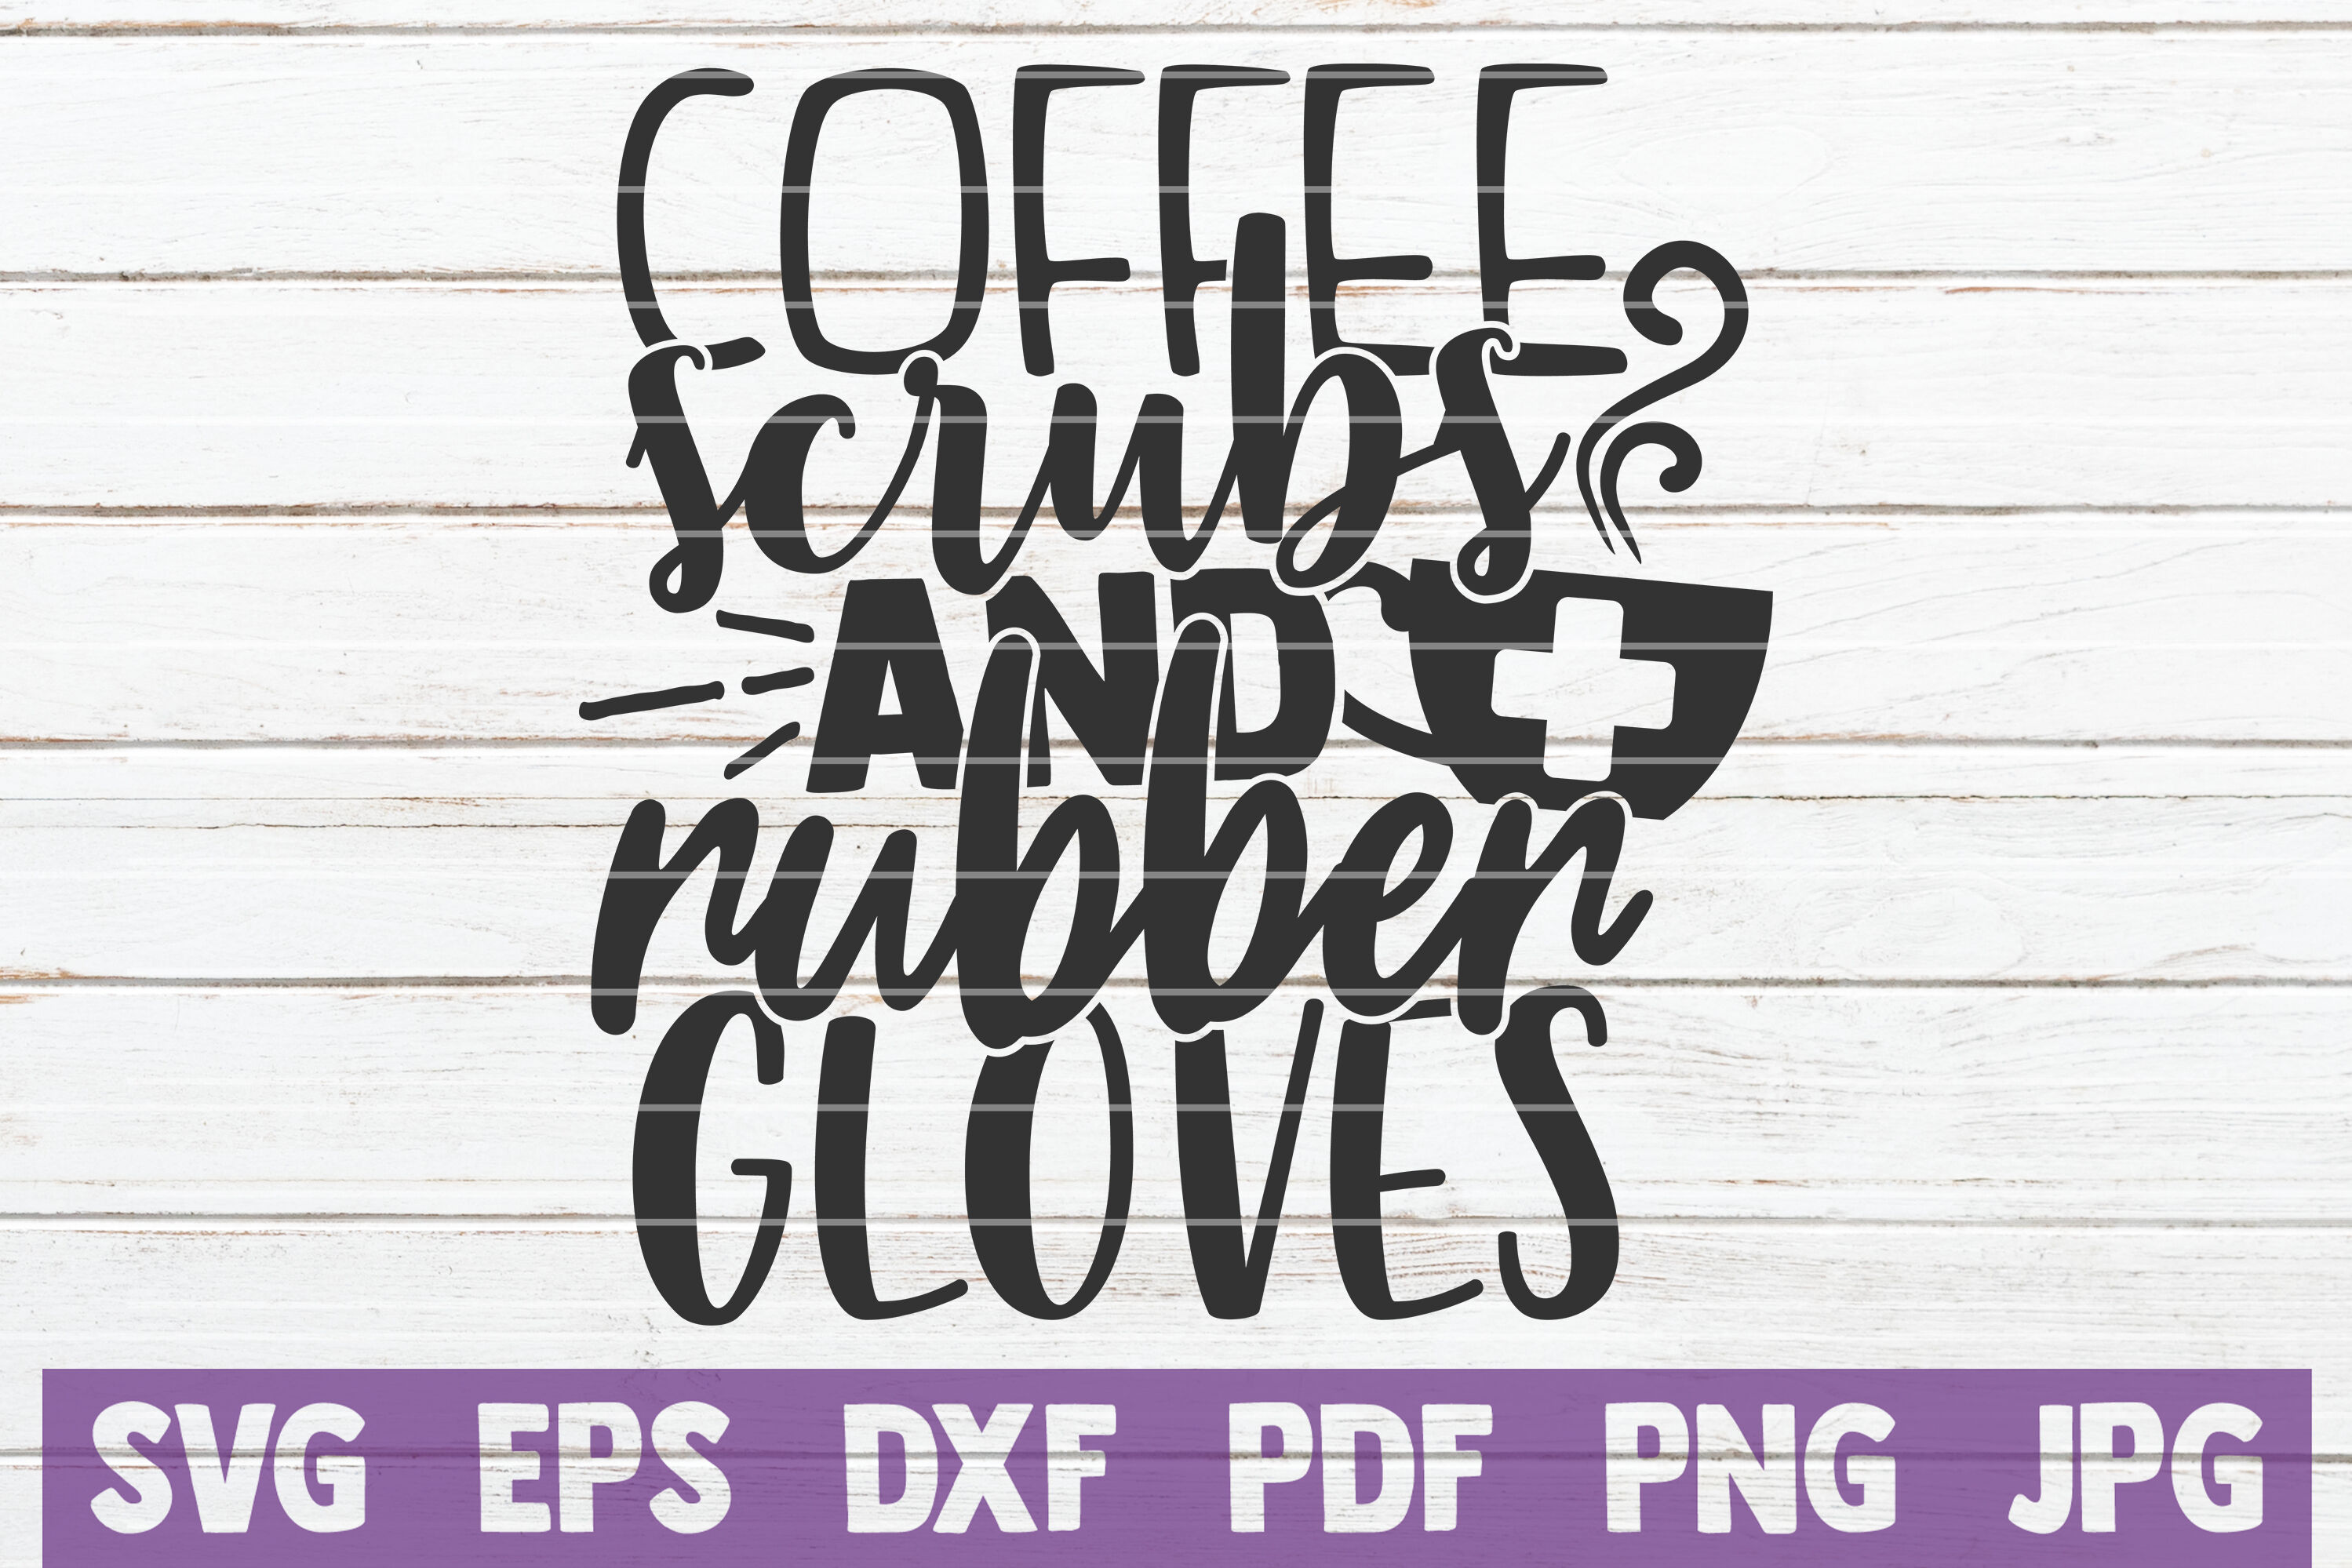 Free Free Coffee Scrubs Rubber Gloves Svg 770 SVG PNG EPS DXF File